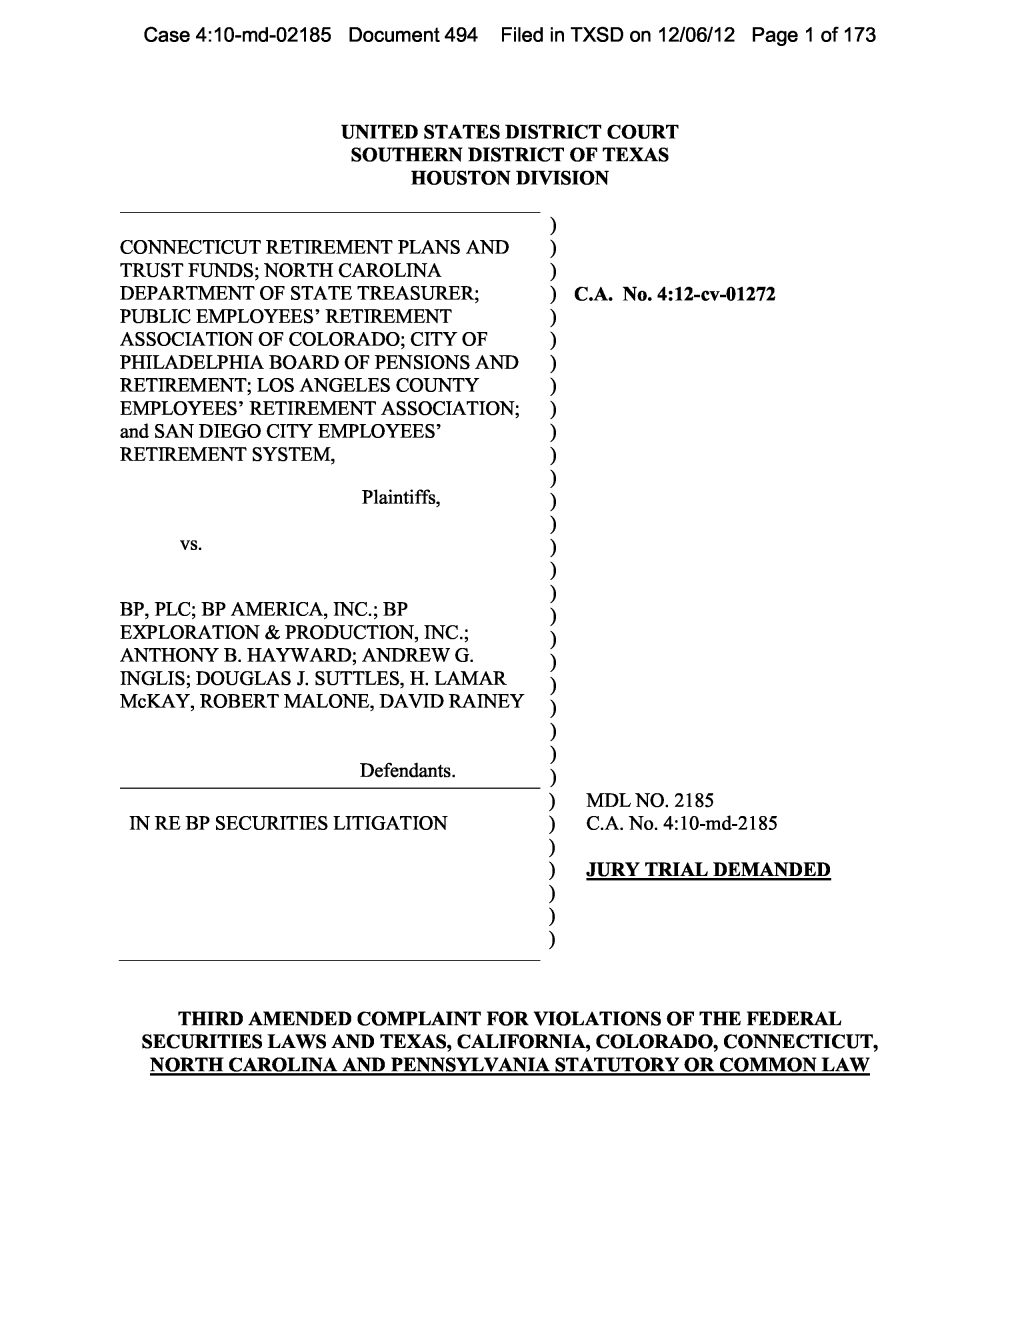 In Re: BP P.L.C. Securities Litigation 10-MD-02185-Third Amended